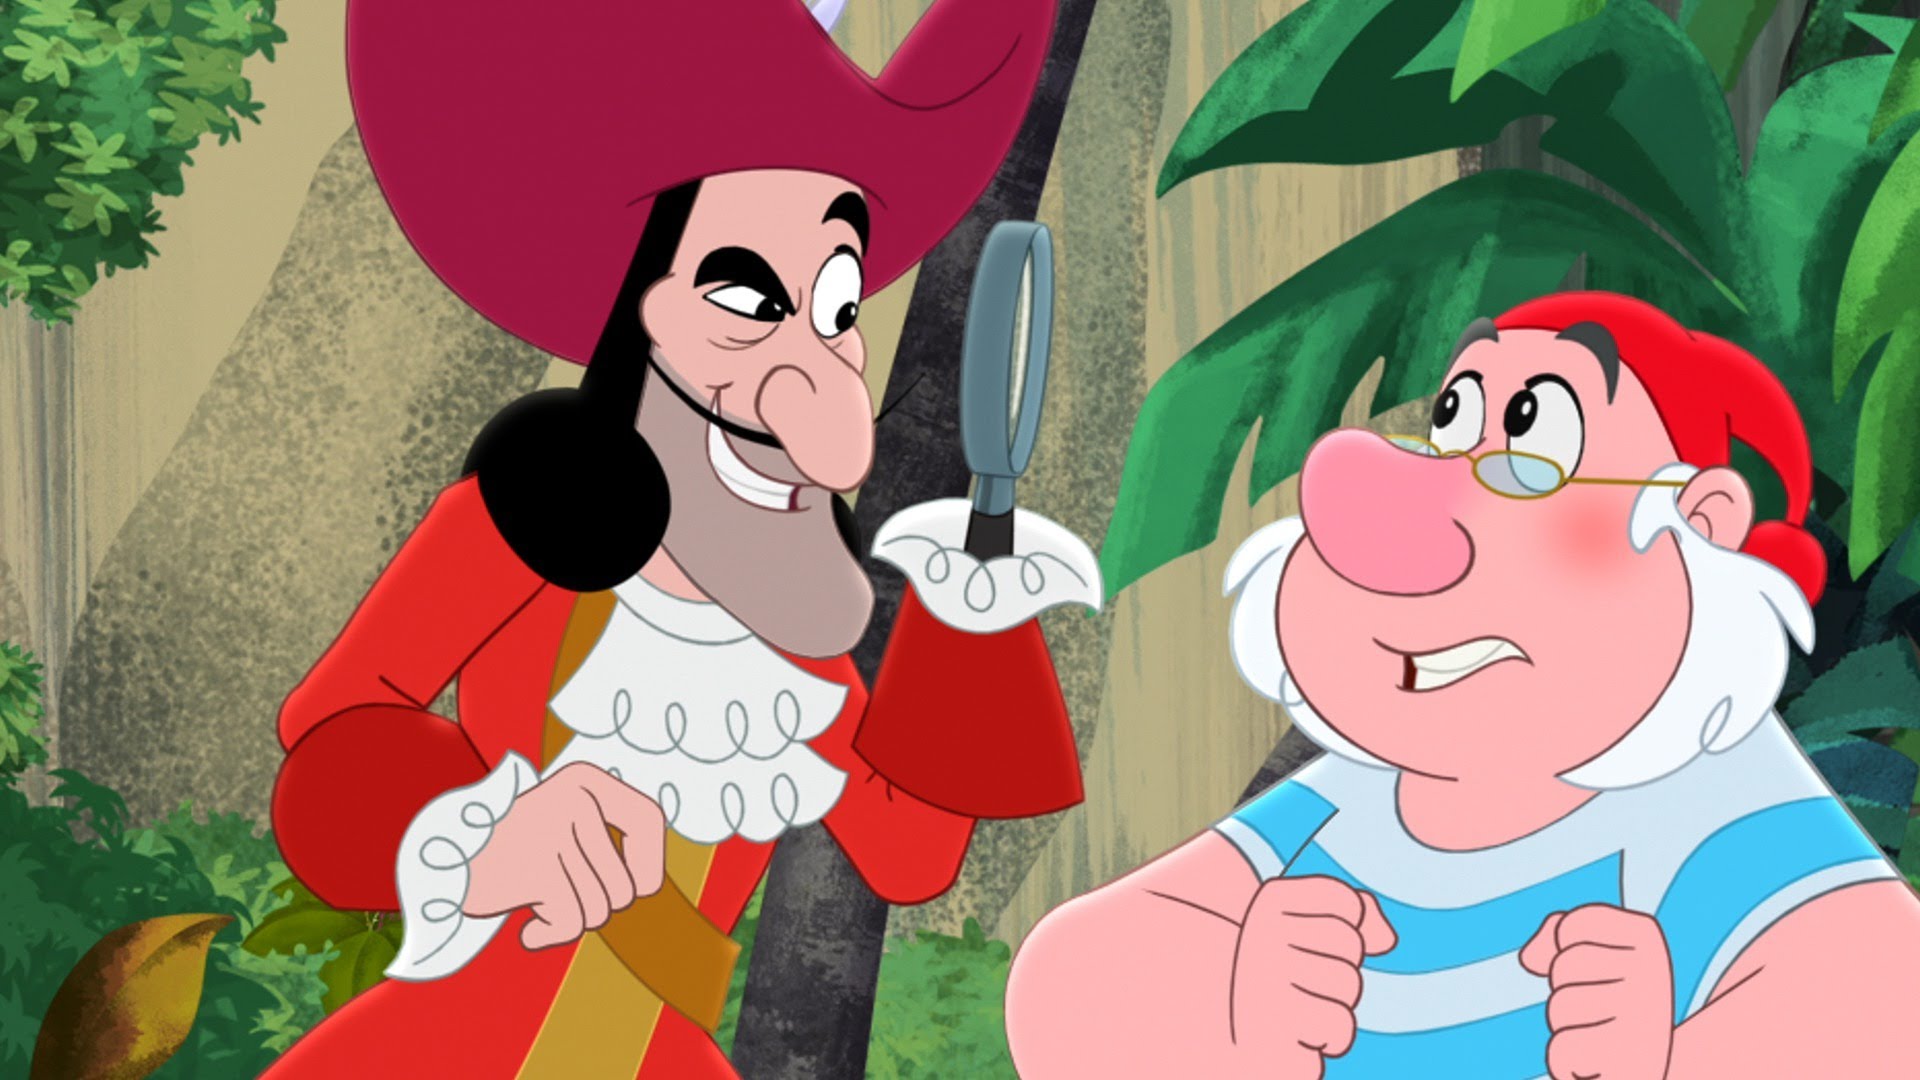 Image Hookandsmee Hideoutits Hook Jake And The Never Land Pirates Wiki Fandom Powered